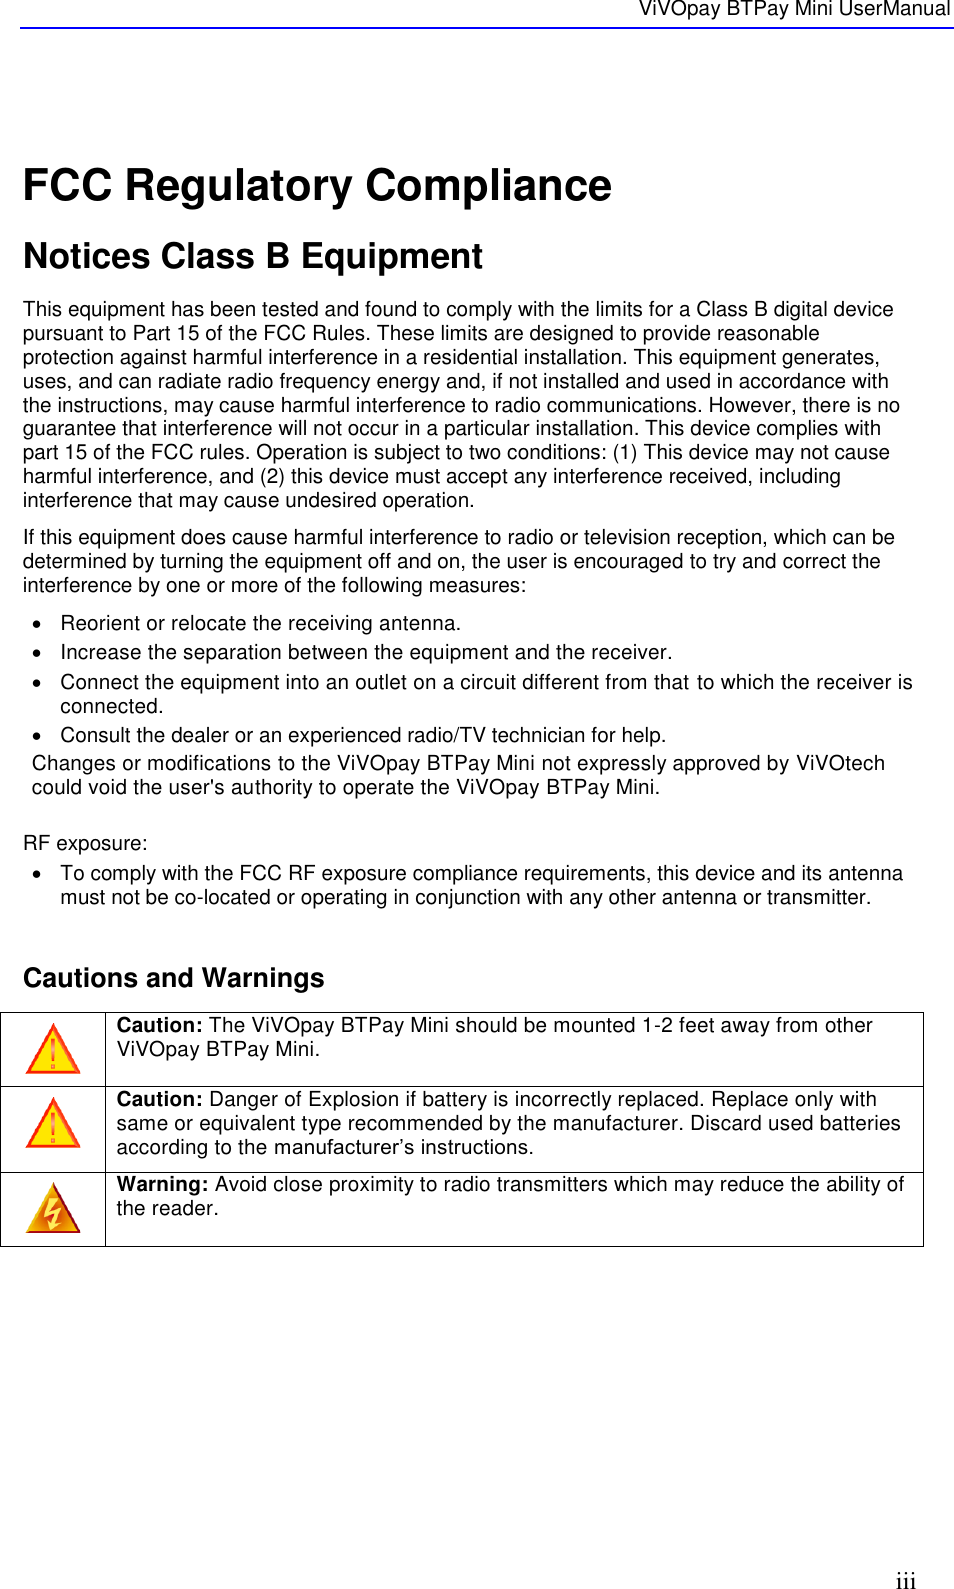   ViVOpay BTPay Mini UserManual     iii  FCC Regulatory Compliance Notices Class B Equipment This equipment has been tested and found to comply with the limits for a Class B digital device pursuant to Part 15 of the FCC Rules. These limits are designed to provide reasonable protection against harmful interference in a residential installation. This equipment generates, uses, and can radiate radio frequency energy and, if not installed and used in accordance with the instructions, may cause harmful interference to radio communications. However, there is no guarantee that interference will not occur in a particular installation. This device complies with part 15 of the FCC rules. Operation is subject to two conditions: (1) This device may not cause harmful interference, and (2) this device must accept any interference received, including interference that may cause undesired operation. If this equipment does cause harmful interference to radio or television reception, which can be determined by turning the equipment off and on, the user is encouraged to try and correct the interference by one or more of the following measures:   Reorient or relocate the receiving antenna.    Increase the separation between the equipment and the receiver.   Connect the equipment into an outlet on a circuit different from that to which the receiver is connected.    Consult the dealer or an experienced radio/TV technician for help.  Changes or modifications to the ViVOpay BTPay Mini not expressly approved by ViVOtech could void the user&apos;s authority to operate the ViVOpay BTPay Mini.  RF exposure:   To comply with the FCC RF exposure compliance requirements, this device and its antenna must not be co-located or operating in conjunction with any other antenna or transmitter.  Cautions and Warnings  Caution: The ViVOpay BTPay Mini should be mounted 1-2 feet away from other ViVOpay BTPay Mini.   Caution: Danger of Explosion if battery is incorrectly replaced. Replace only with same or equivalent type recommended by the manufacturer. Discard used batteries according to the manufacturer’s instructions.  Warning: Avoid close proximity to radio transmitters which may reduce the ability of the reader.     